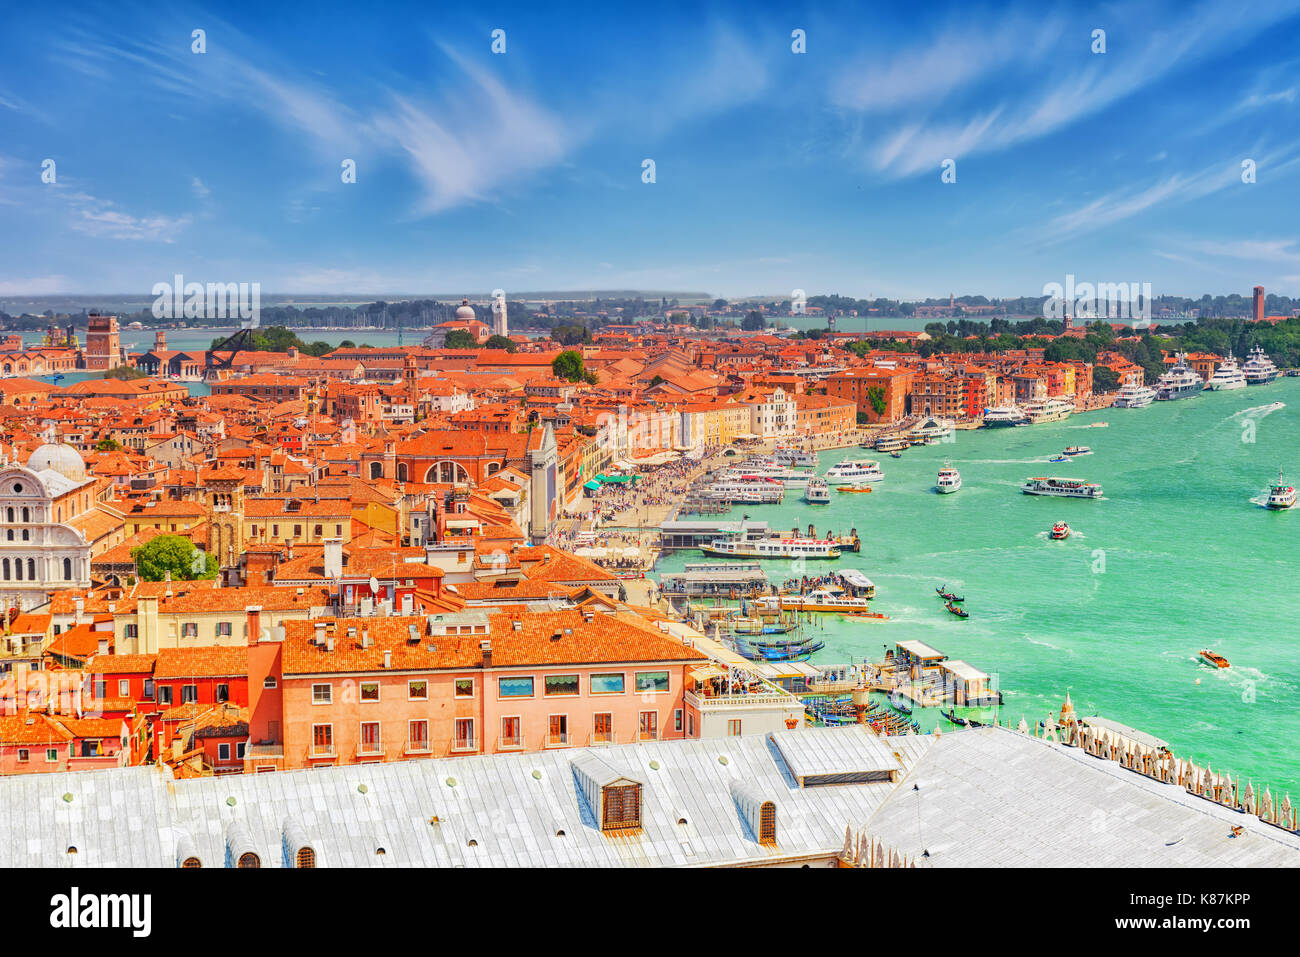 Panoramic view of Venice from the Campanile tower of St. Mark's Cathedral (Campanile di San Marco)- seafront promenade near St. Mark's Square. Italy. Stock Photo